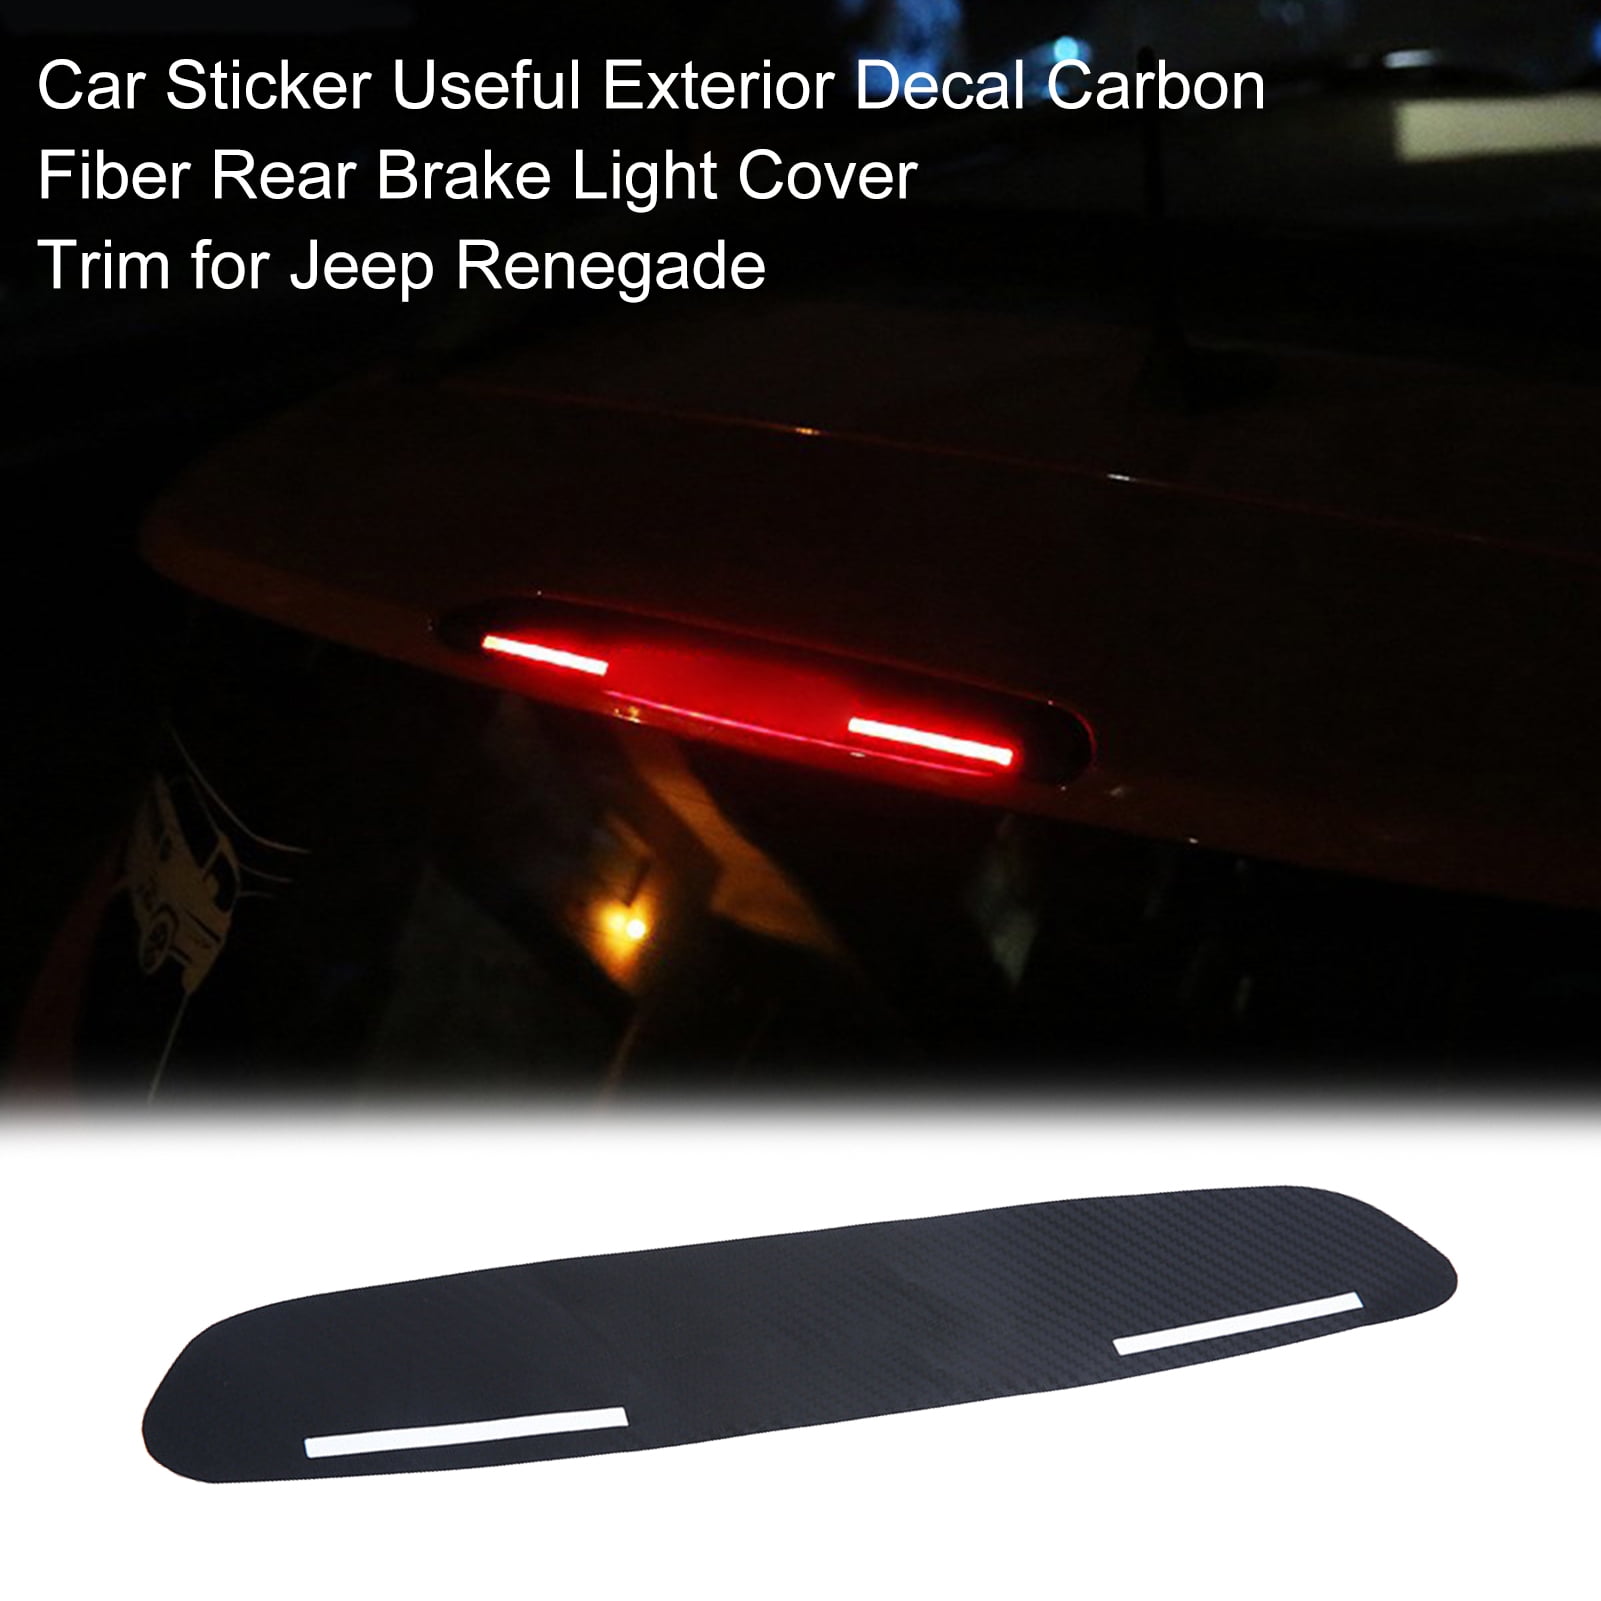 Jeep Renegade Stickers for Sale